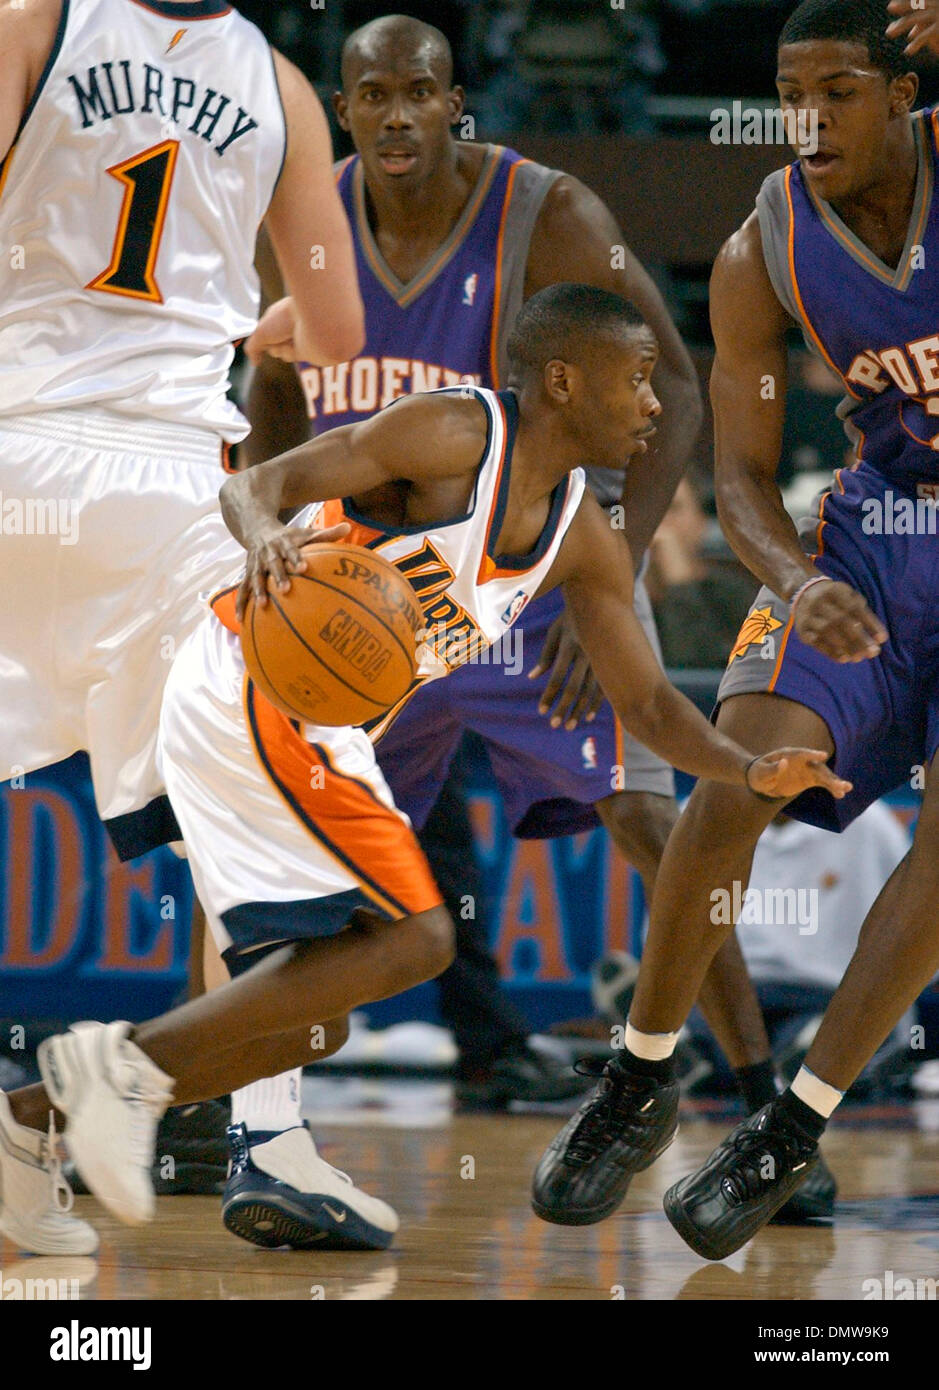 Earl Boykins suspended for Tuesday's game - NBC Sports